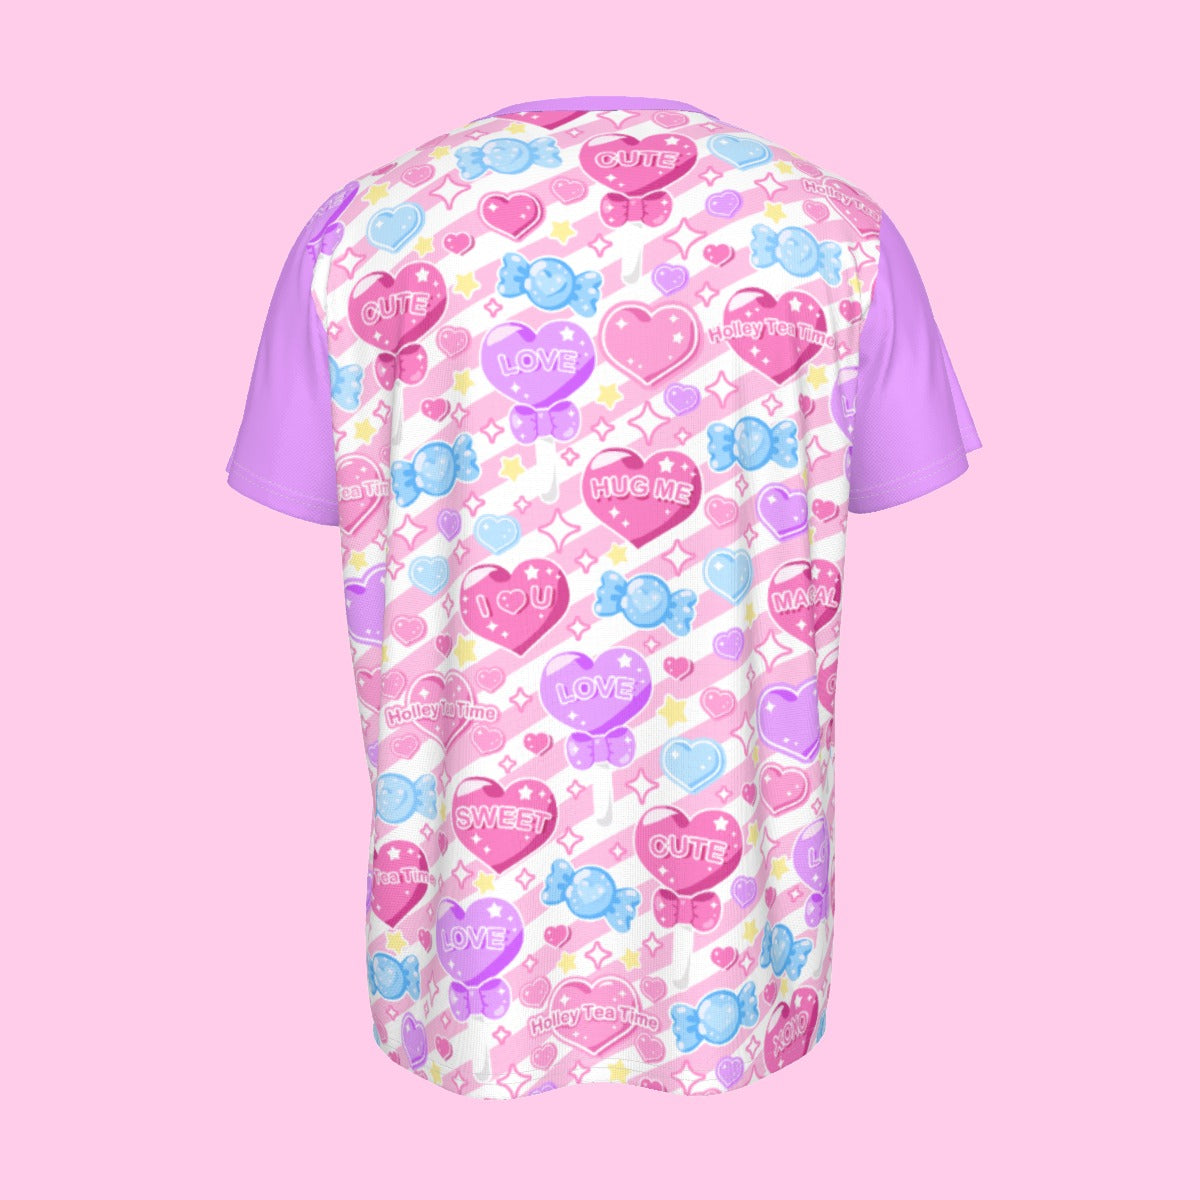 Candy Love Hearts (Colorful Cutie) Men's Round Neck Short Sleeve T-Shirt